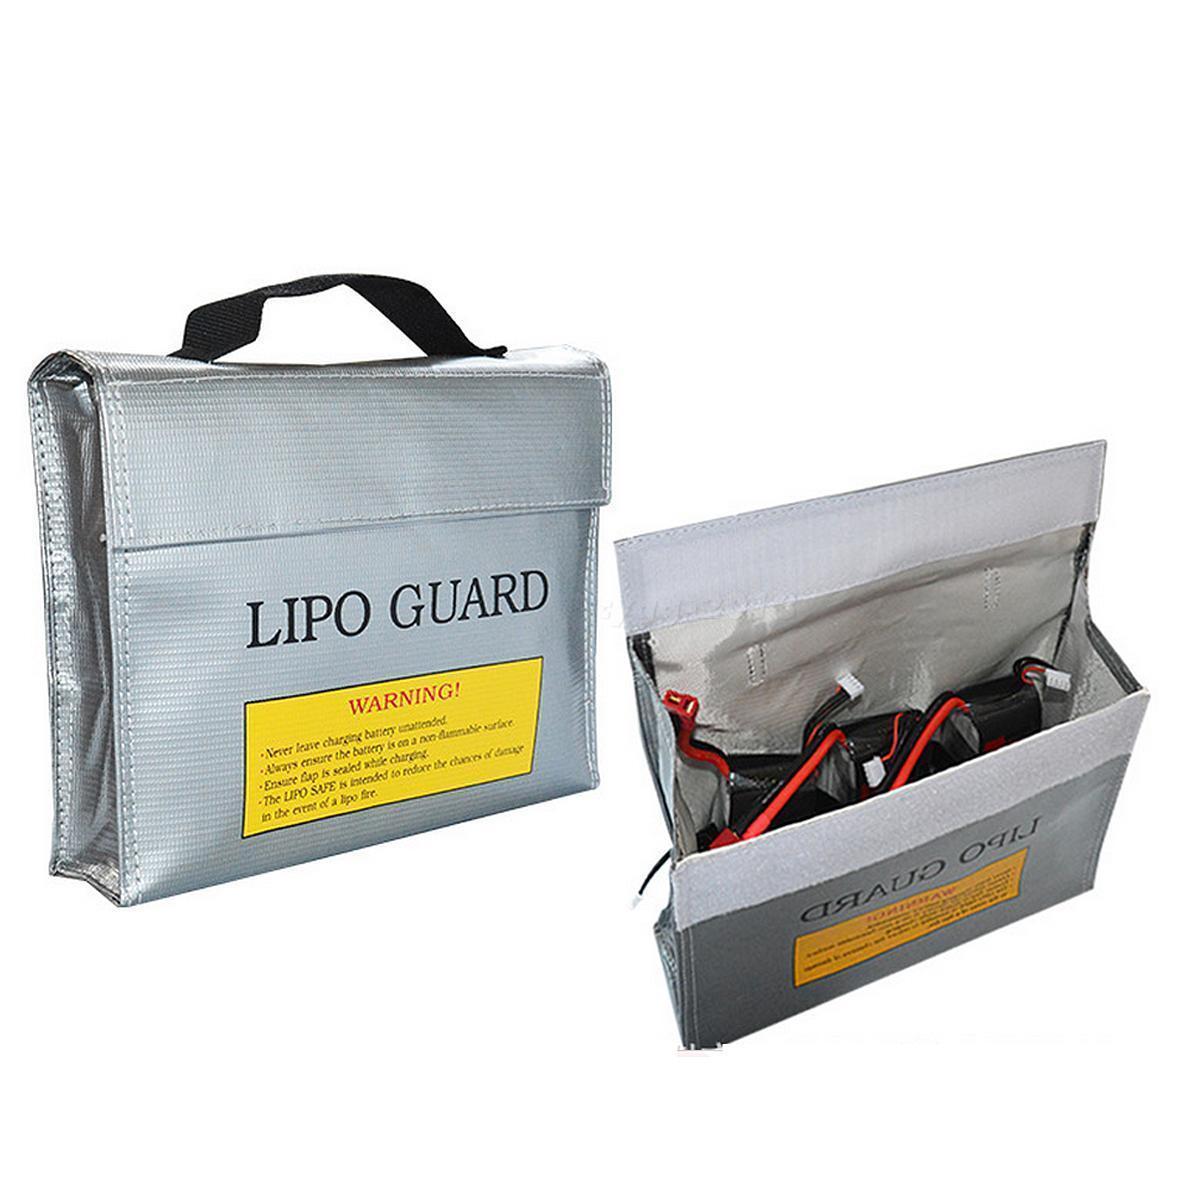  Lipo Battery Fireproof Guard Charging Protection Bag Storage Explosion Proof